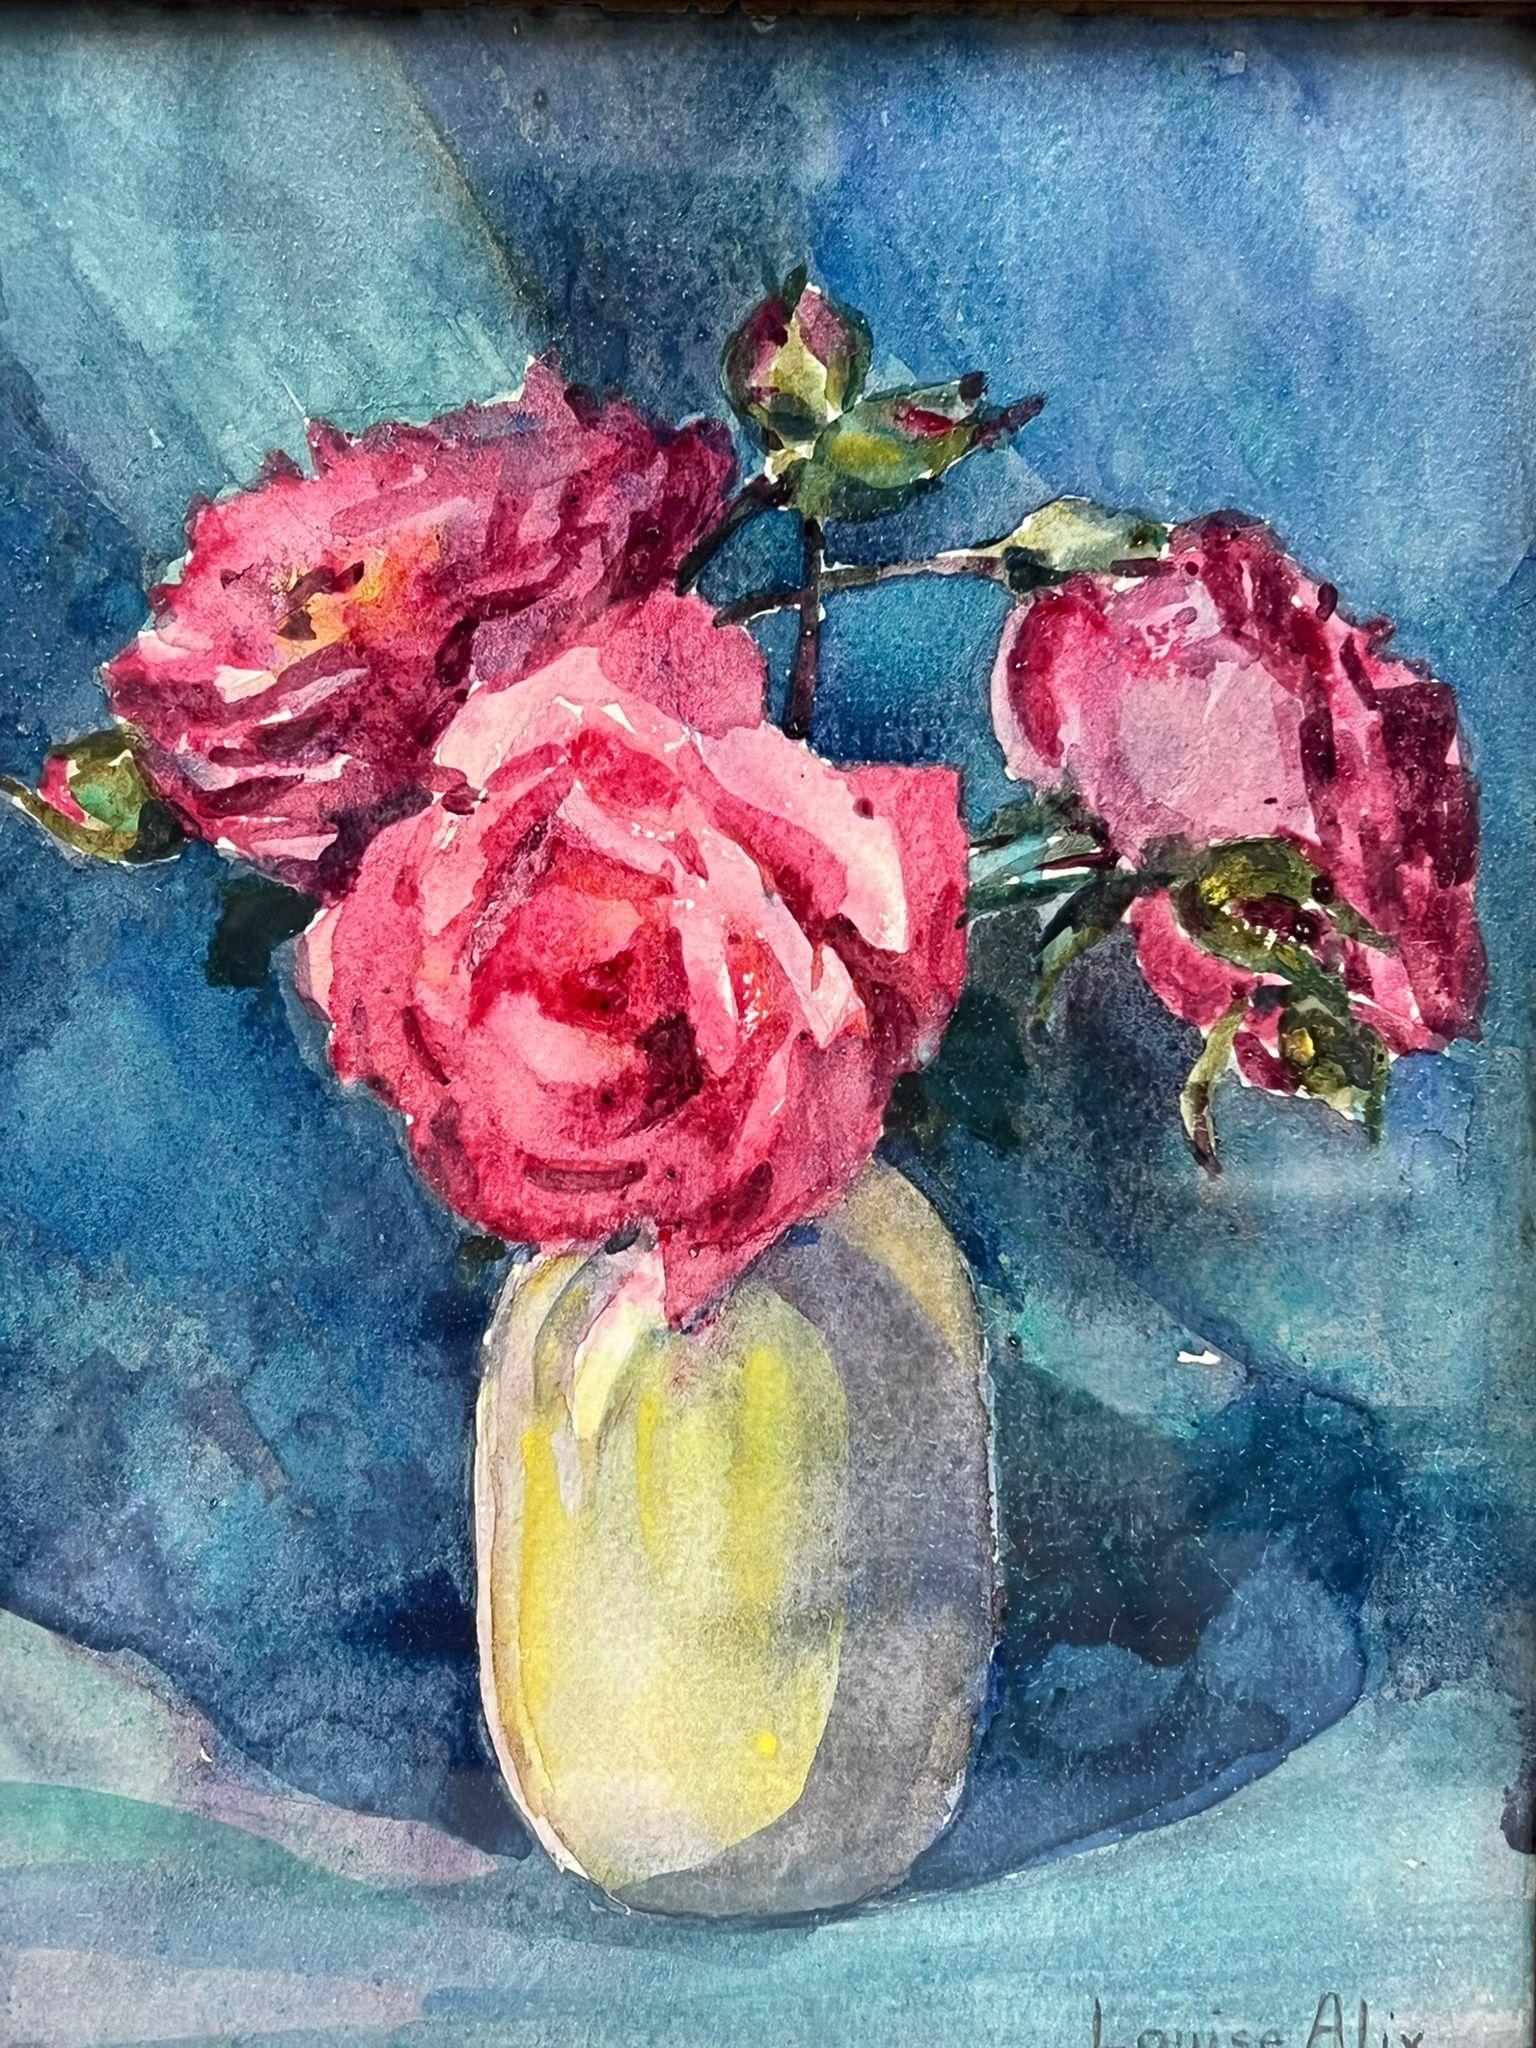 Pink Roses
signed by Louise Alix, French 1950's Impressionist 
watercolour on artist paper stuck on board, framed. Glass covered
frame: 9.75 x 7.5 inches
painting: 9 x 7 inches
provenance: from a large private collection of this artists work in